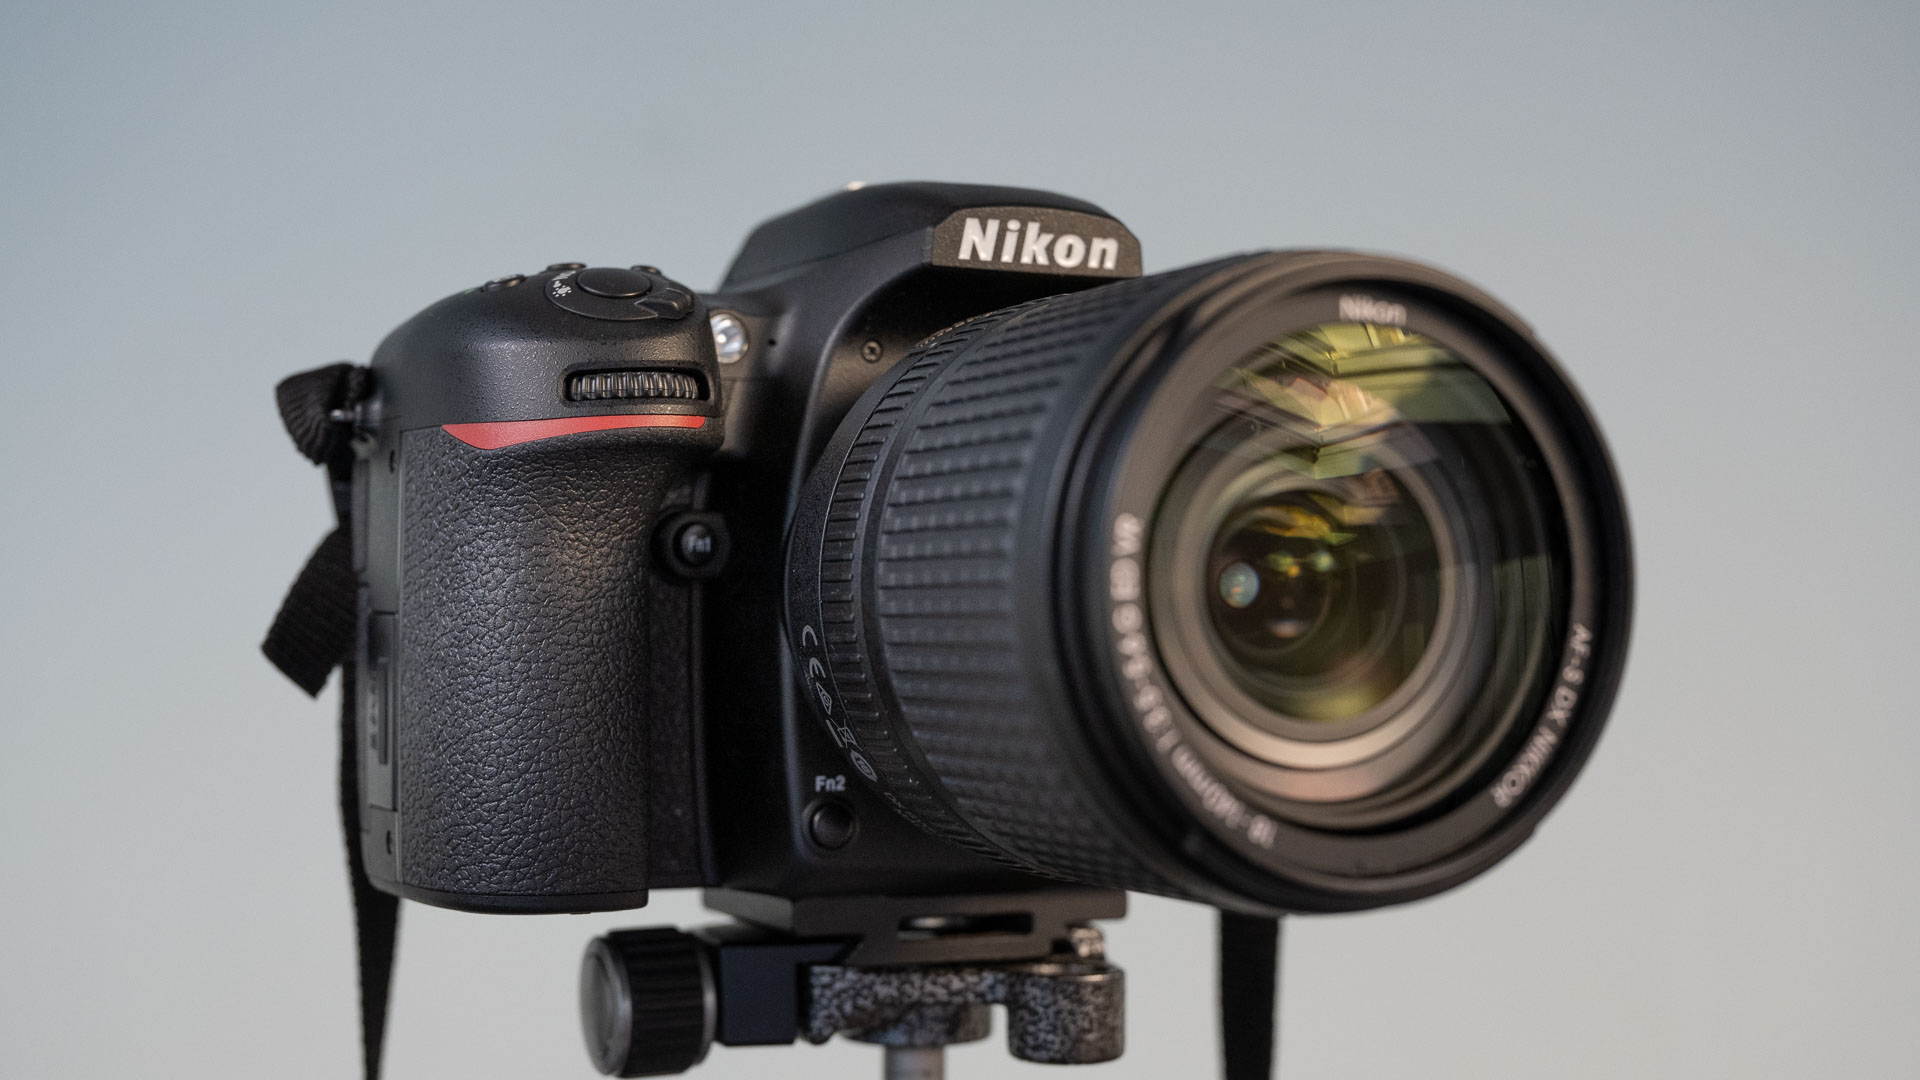 Nikon D7500 on a tripod showing deep grip to hold